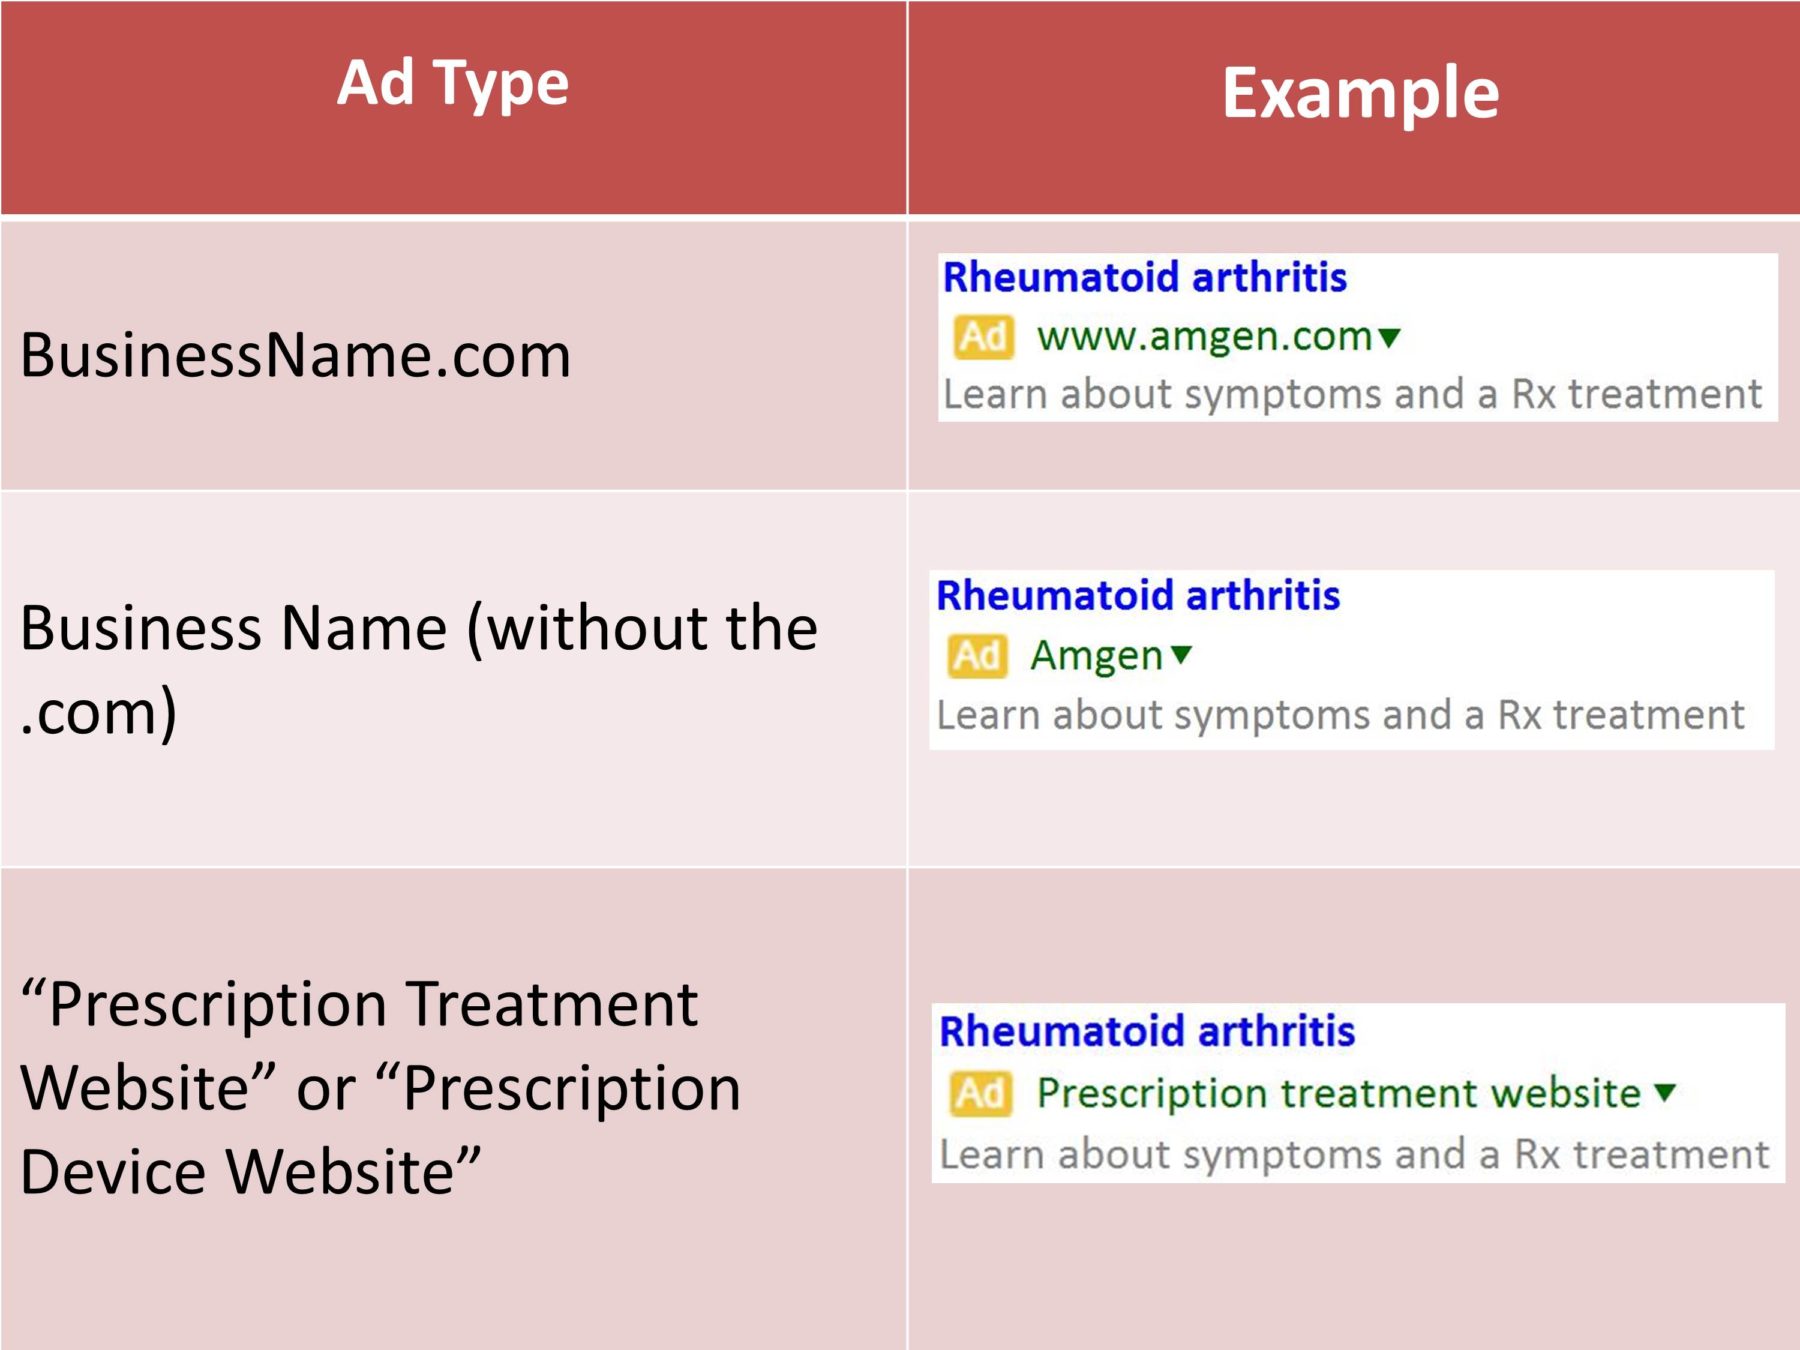 These three new Google ad options replace the vanity URL format